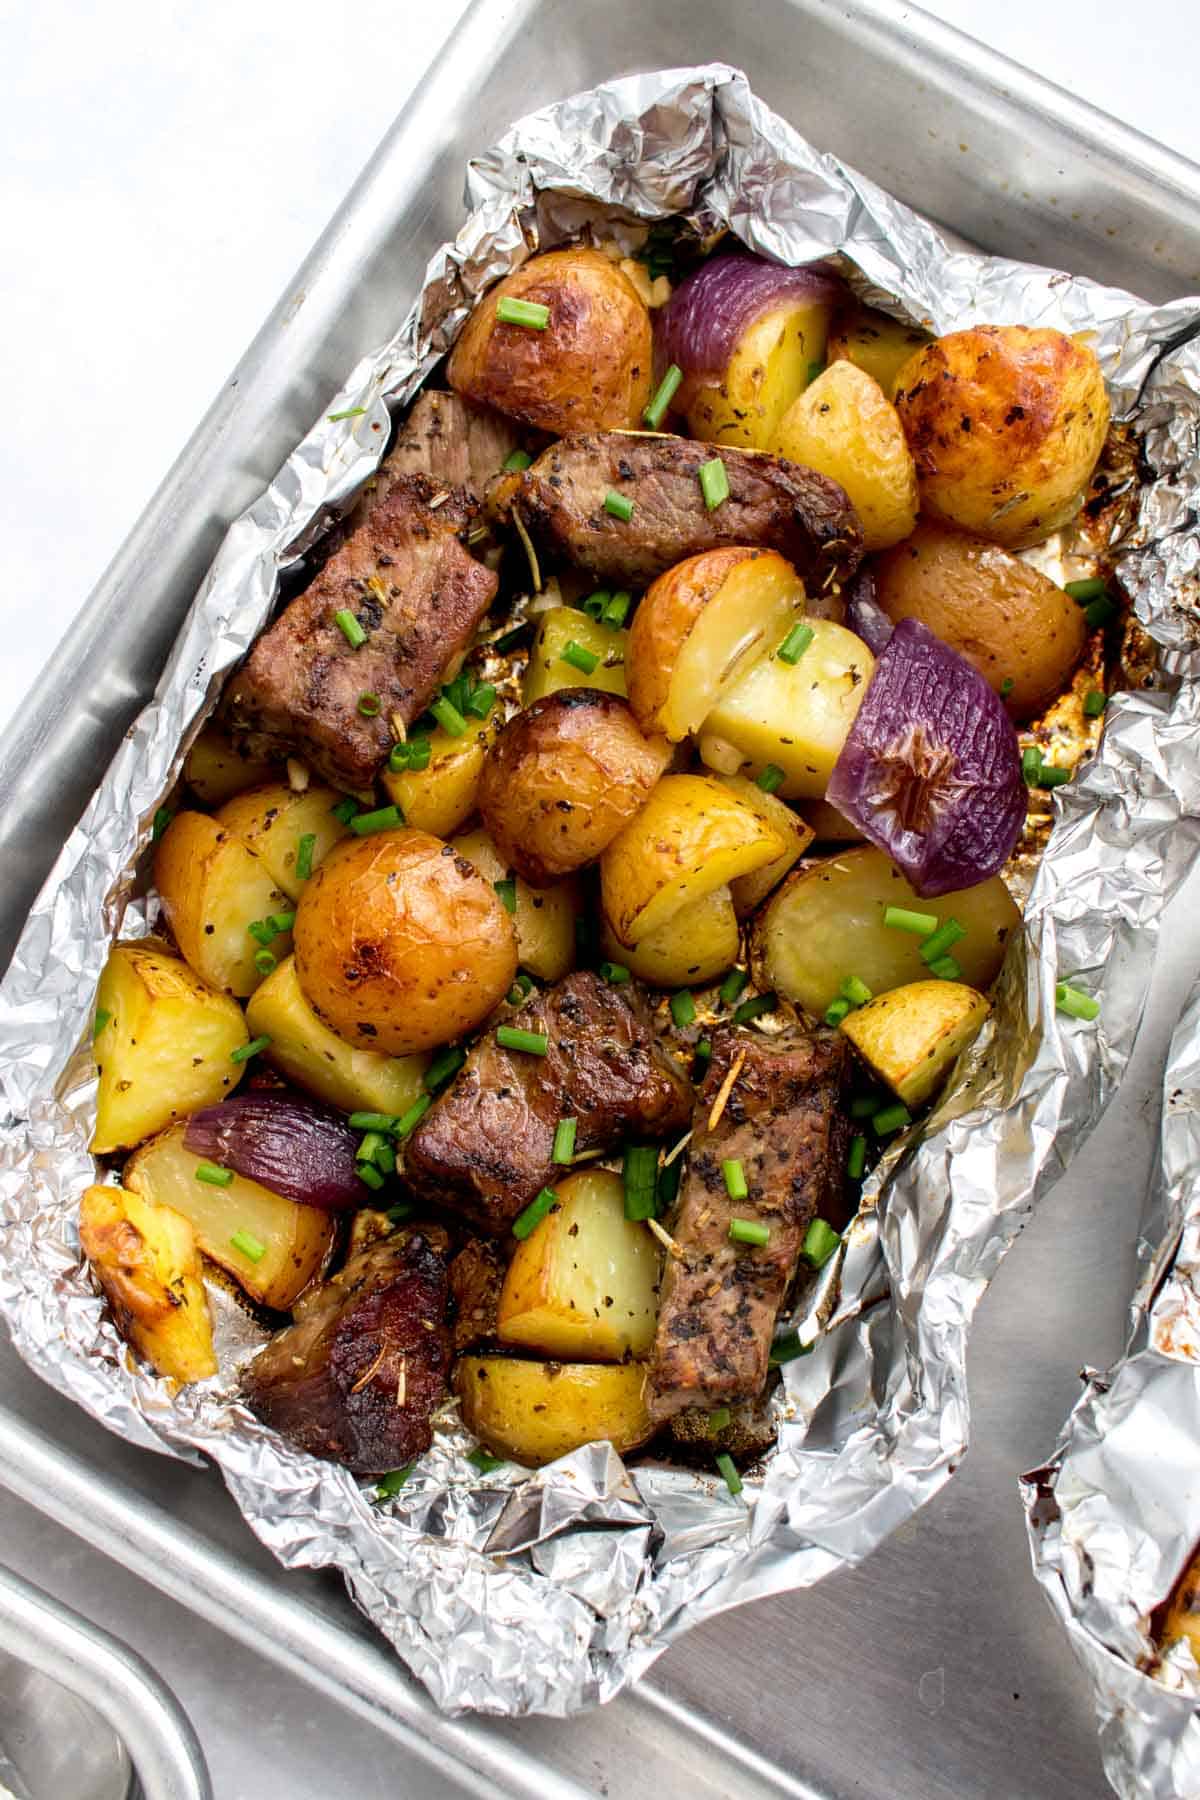 Overhead view of a packet of steak and potatoes, opened, on a half sheet pan.